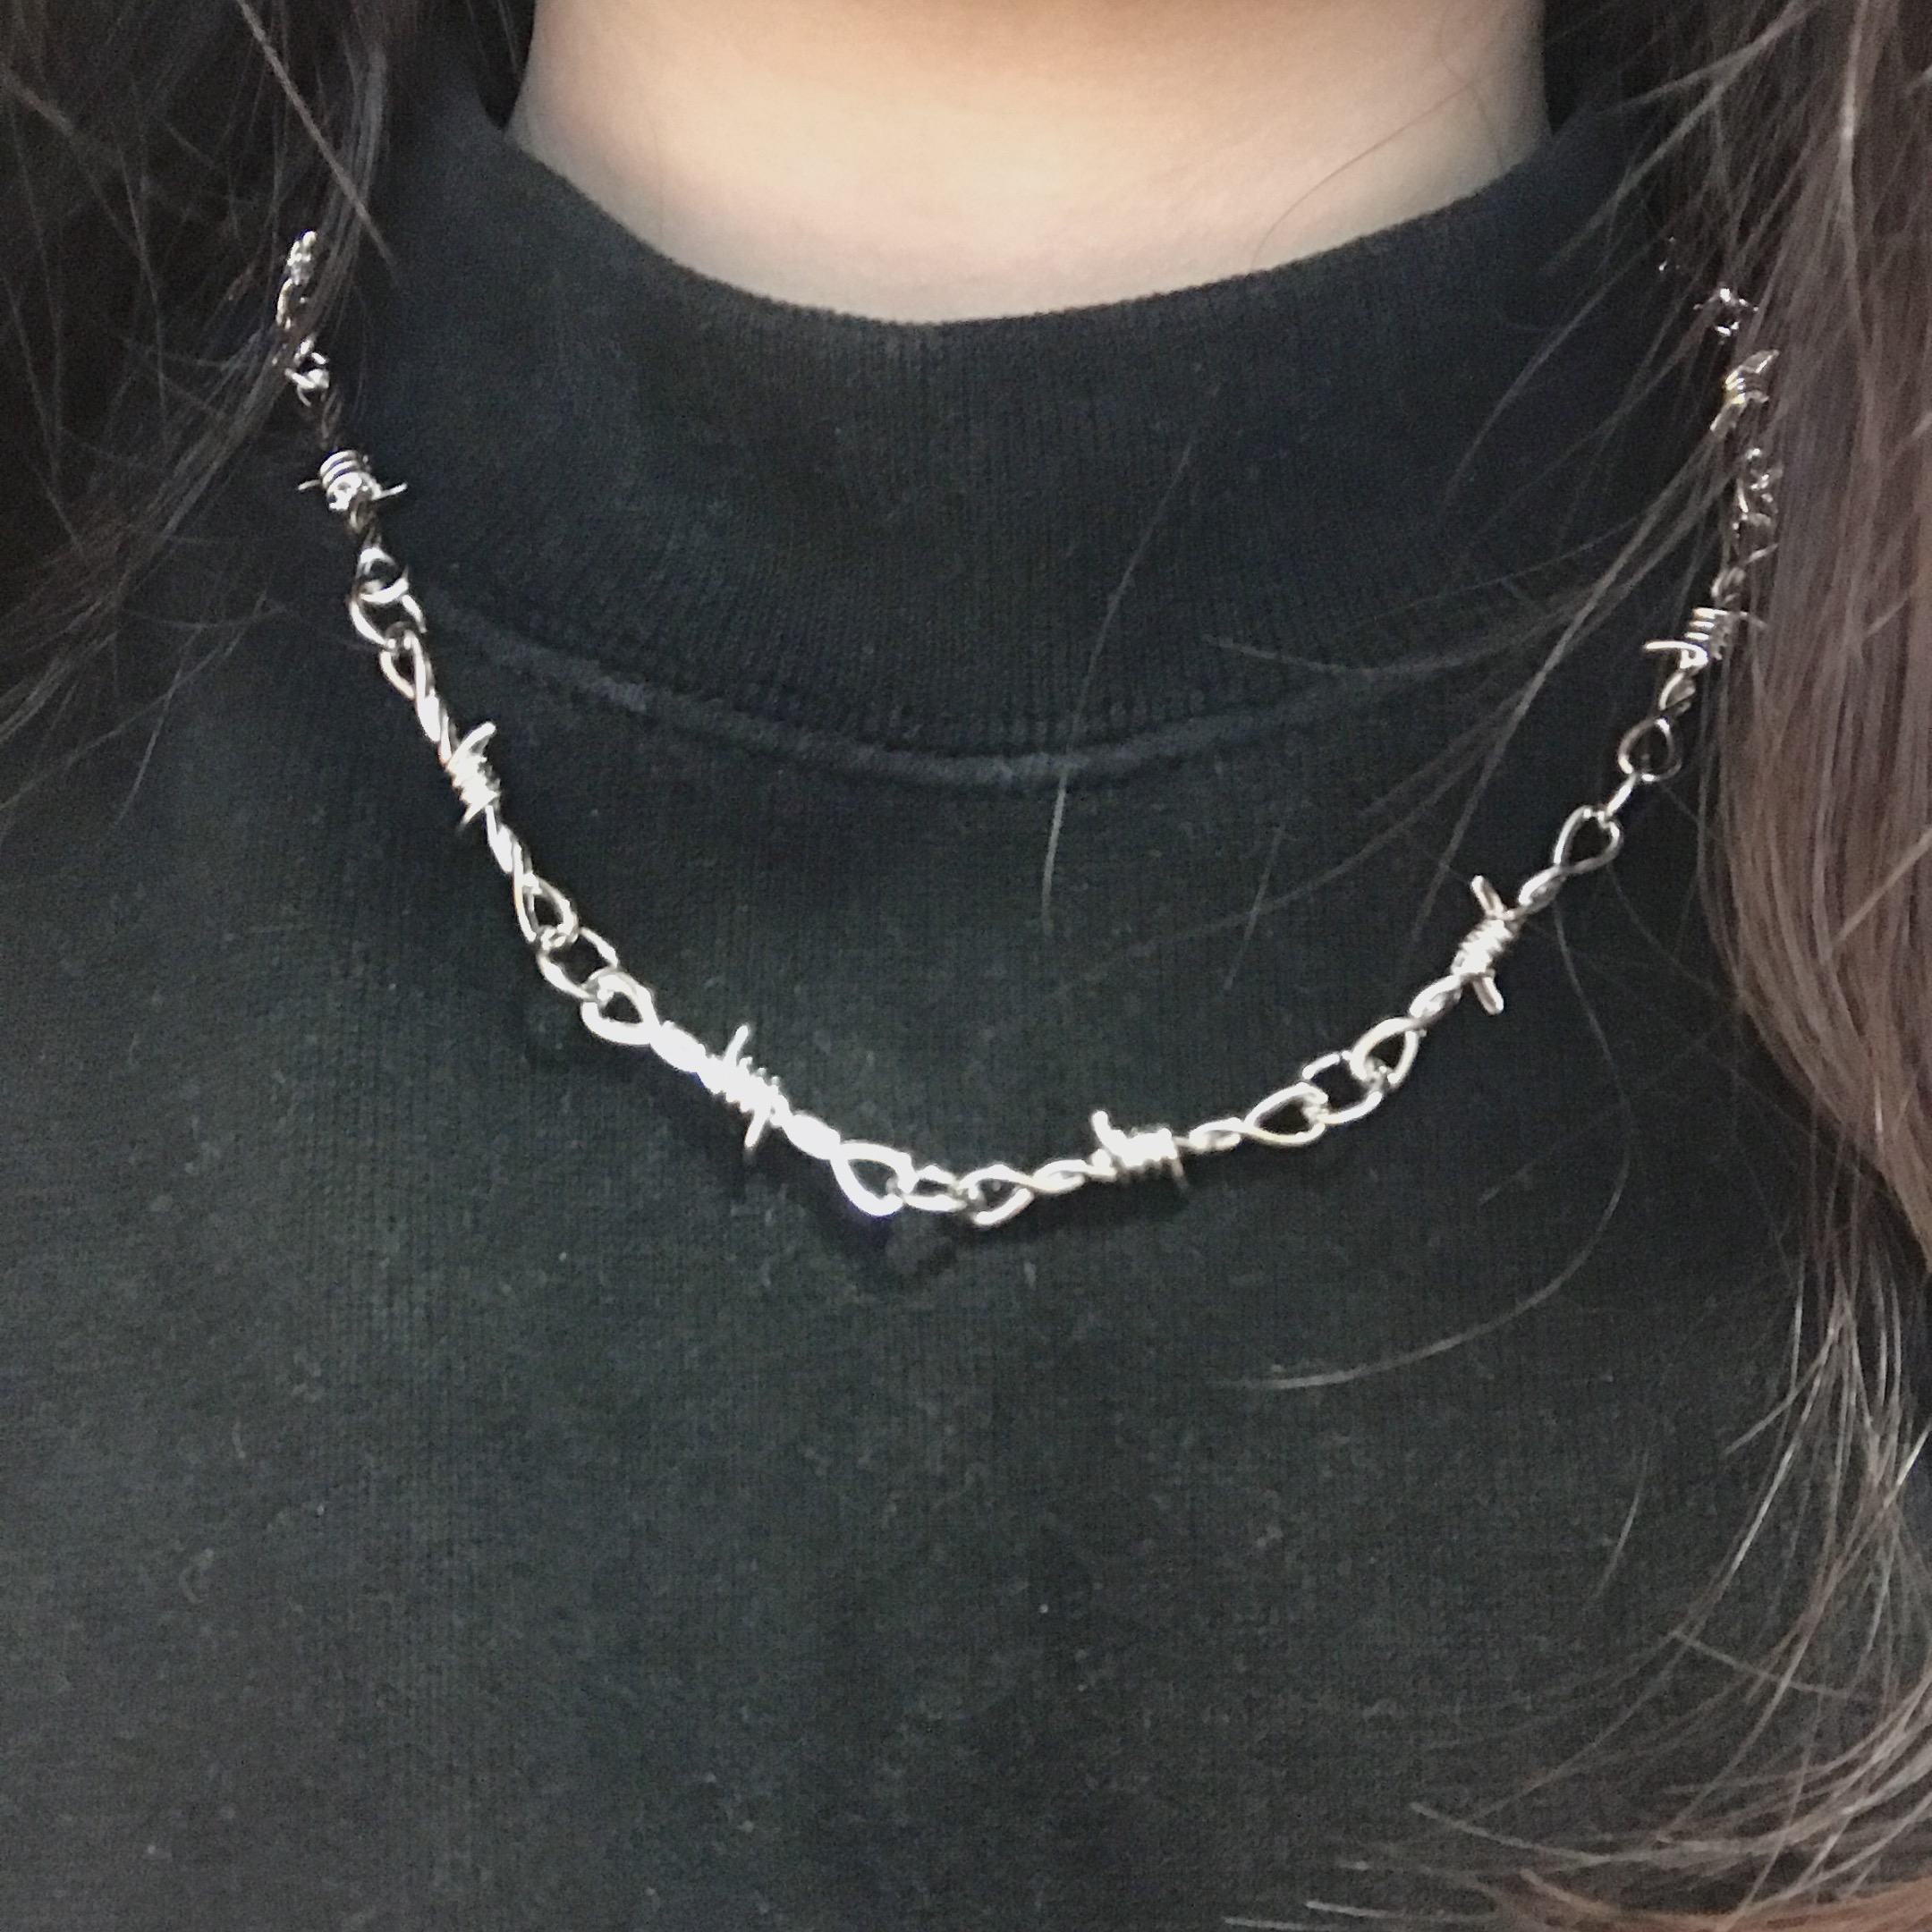 Punk Metal Silver Color Wire Brambles Necklace Barbed Wire Brambles Link Chain Choker Fashion Jewelry Rock Night Club Unisex